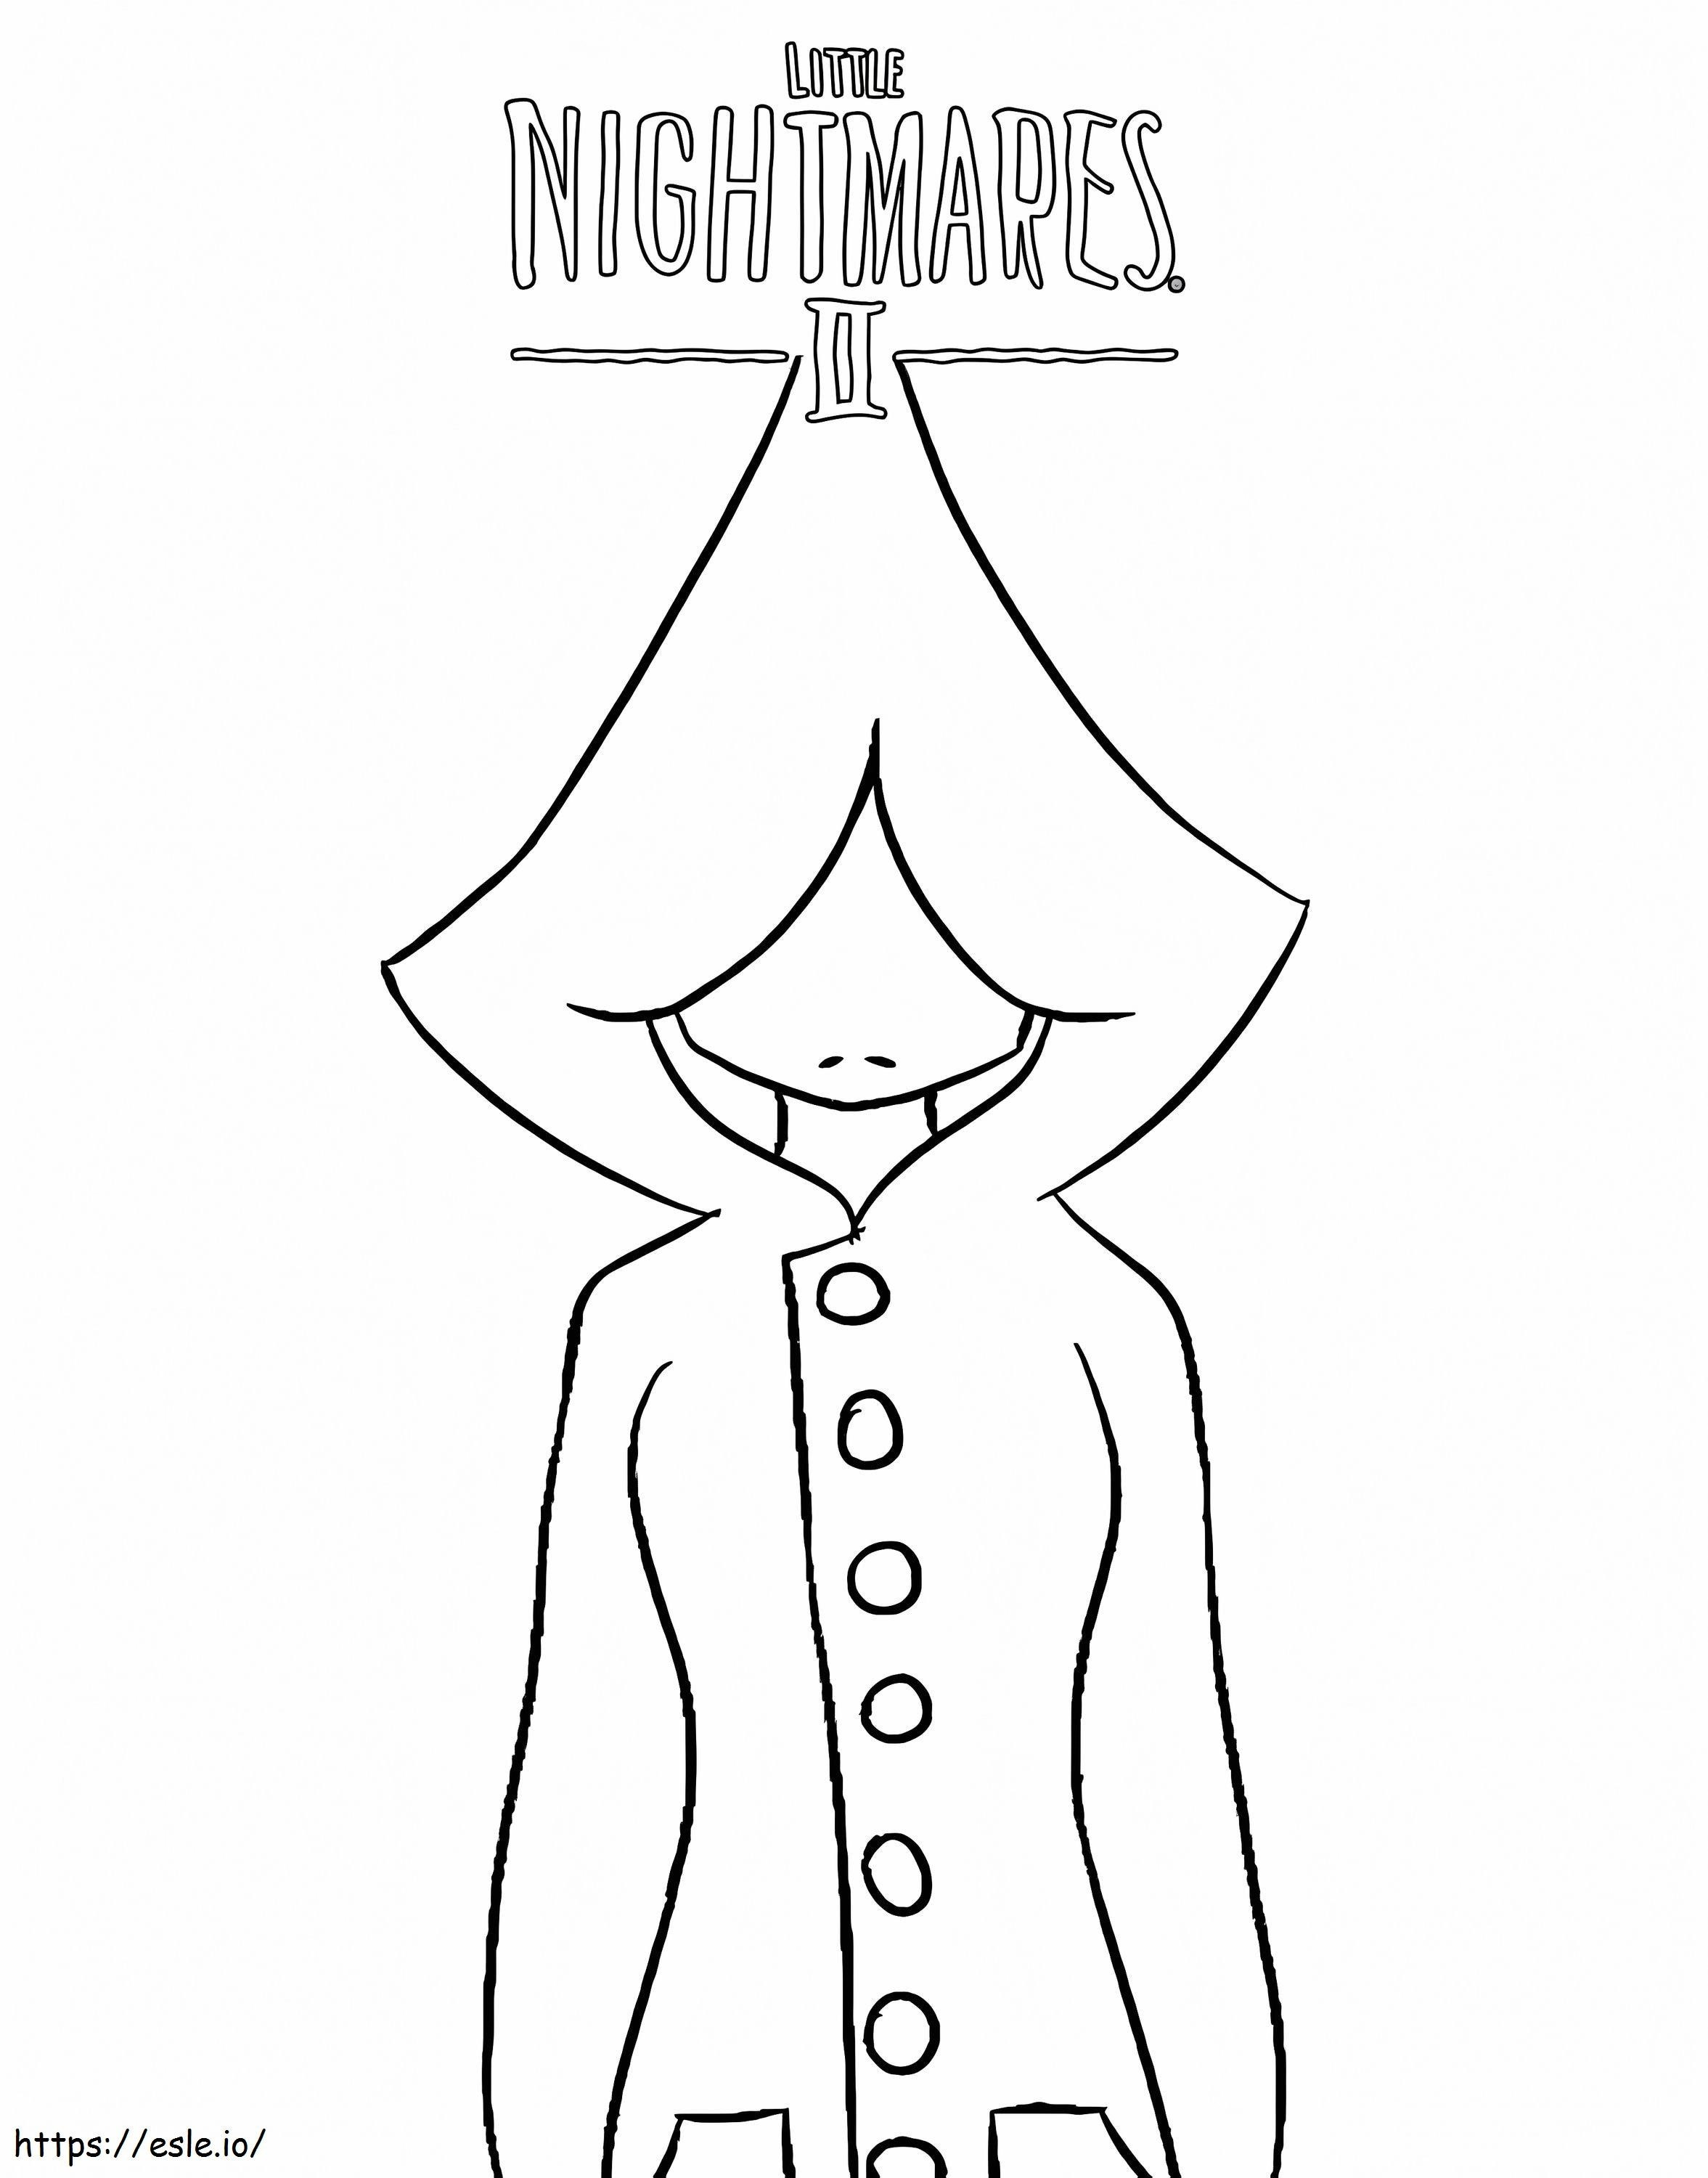 Six From Little Nightmares coloring page